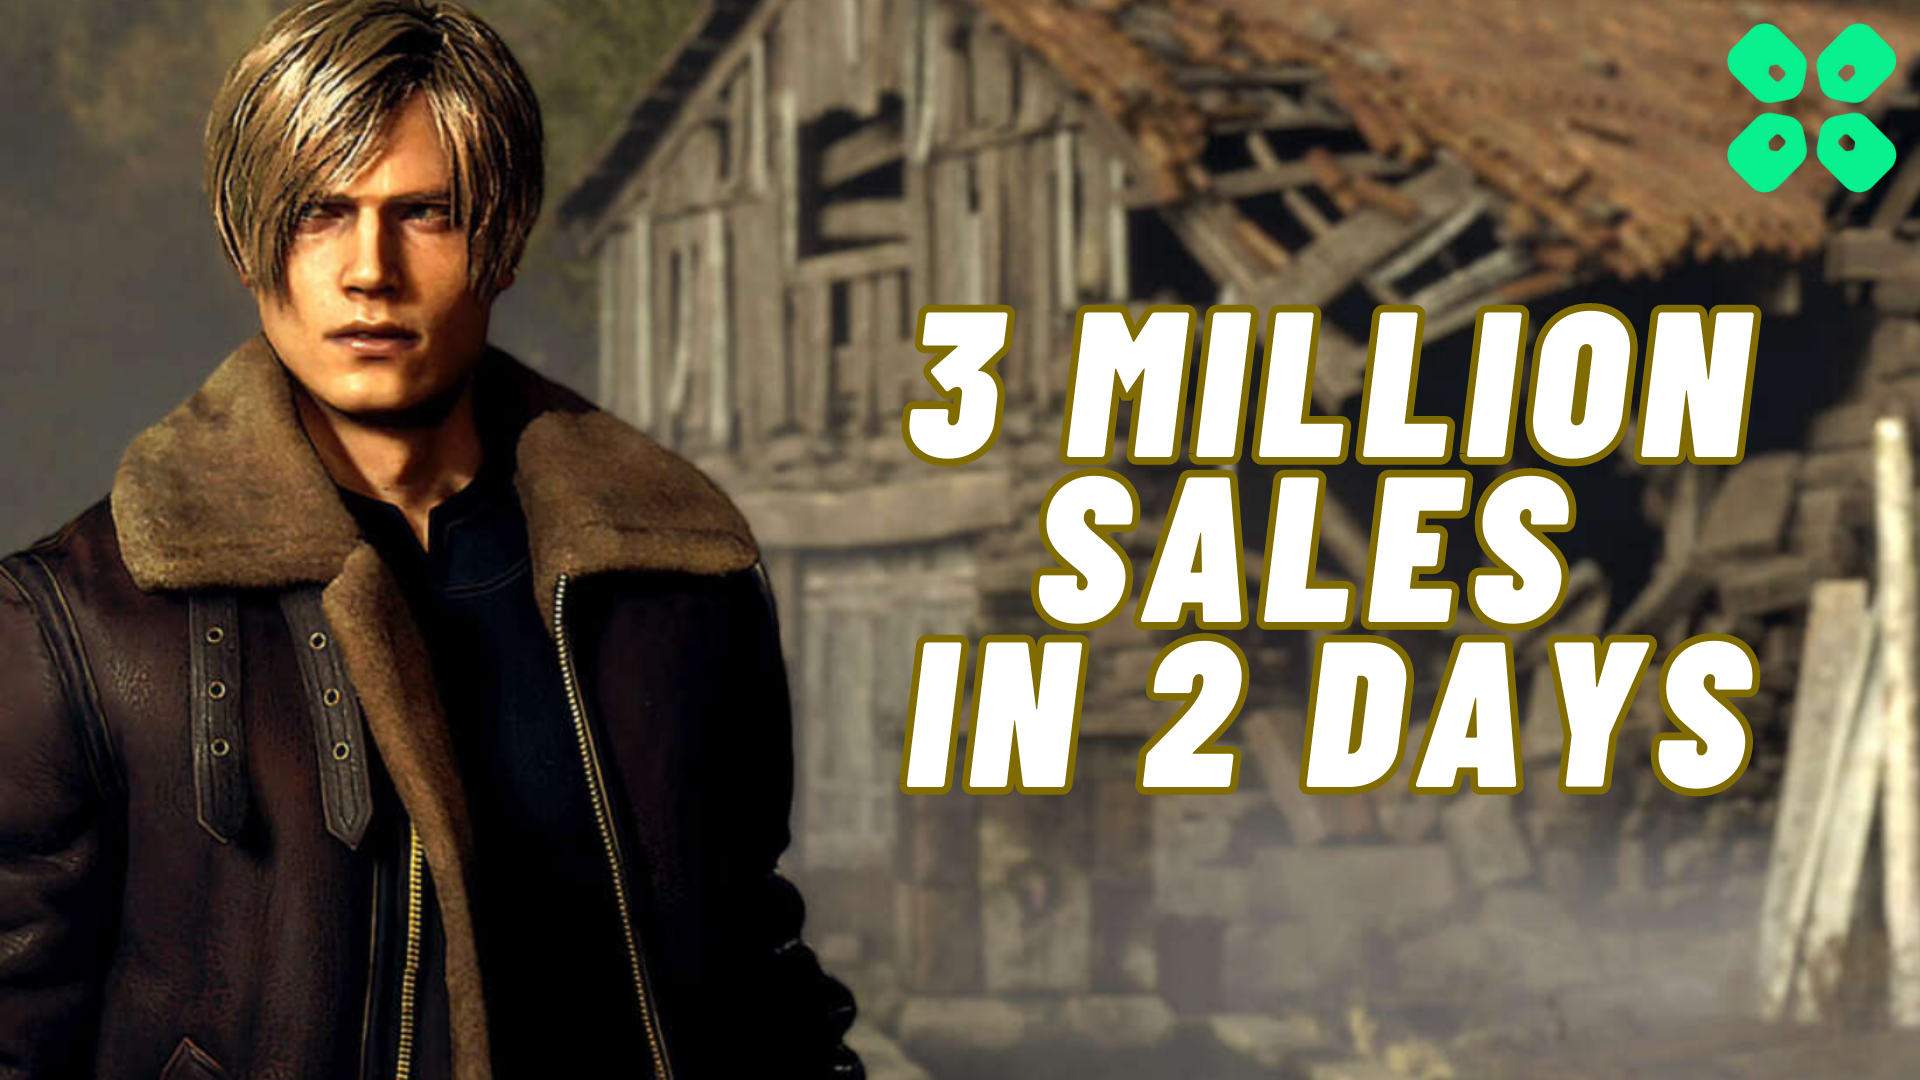 Resident Evil 4 Remake Sold 3 Million Copies in 2 Days